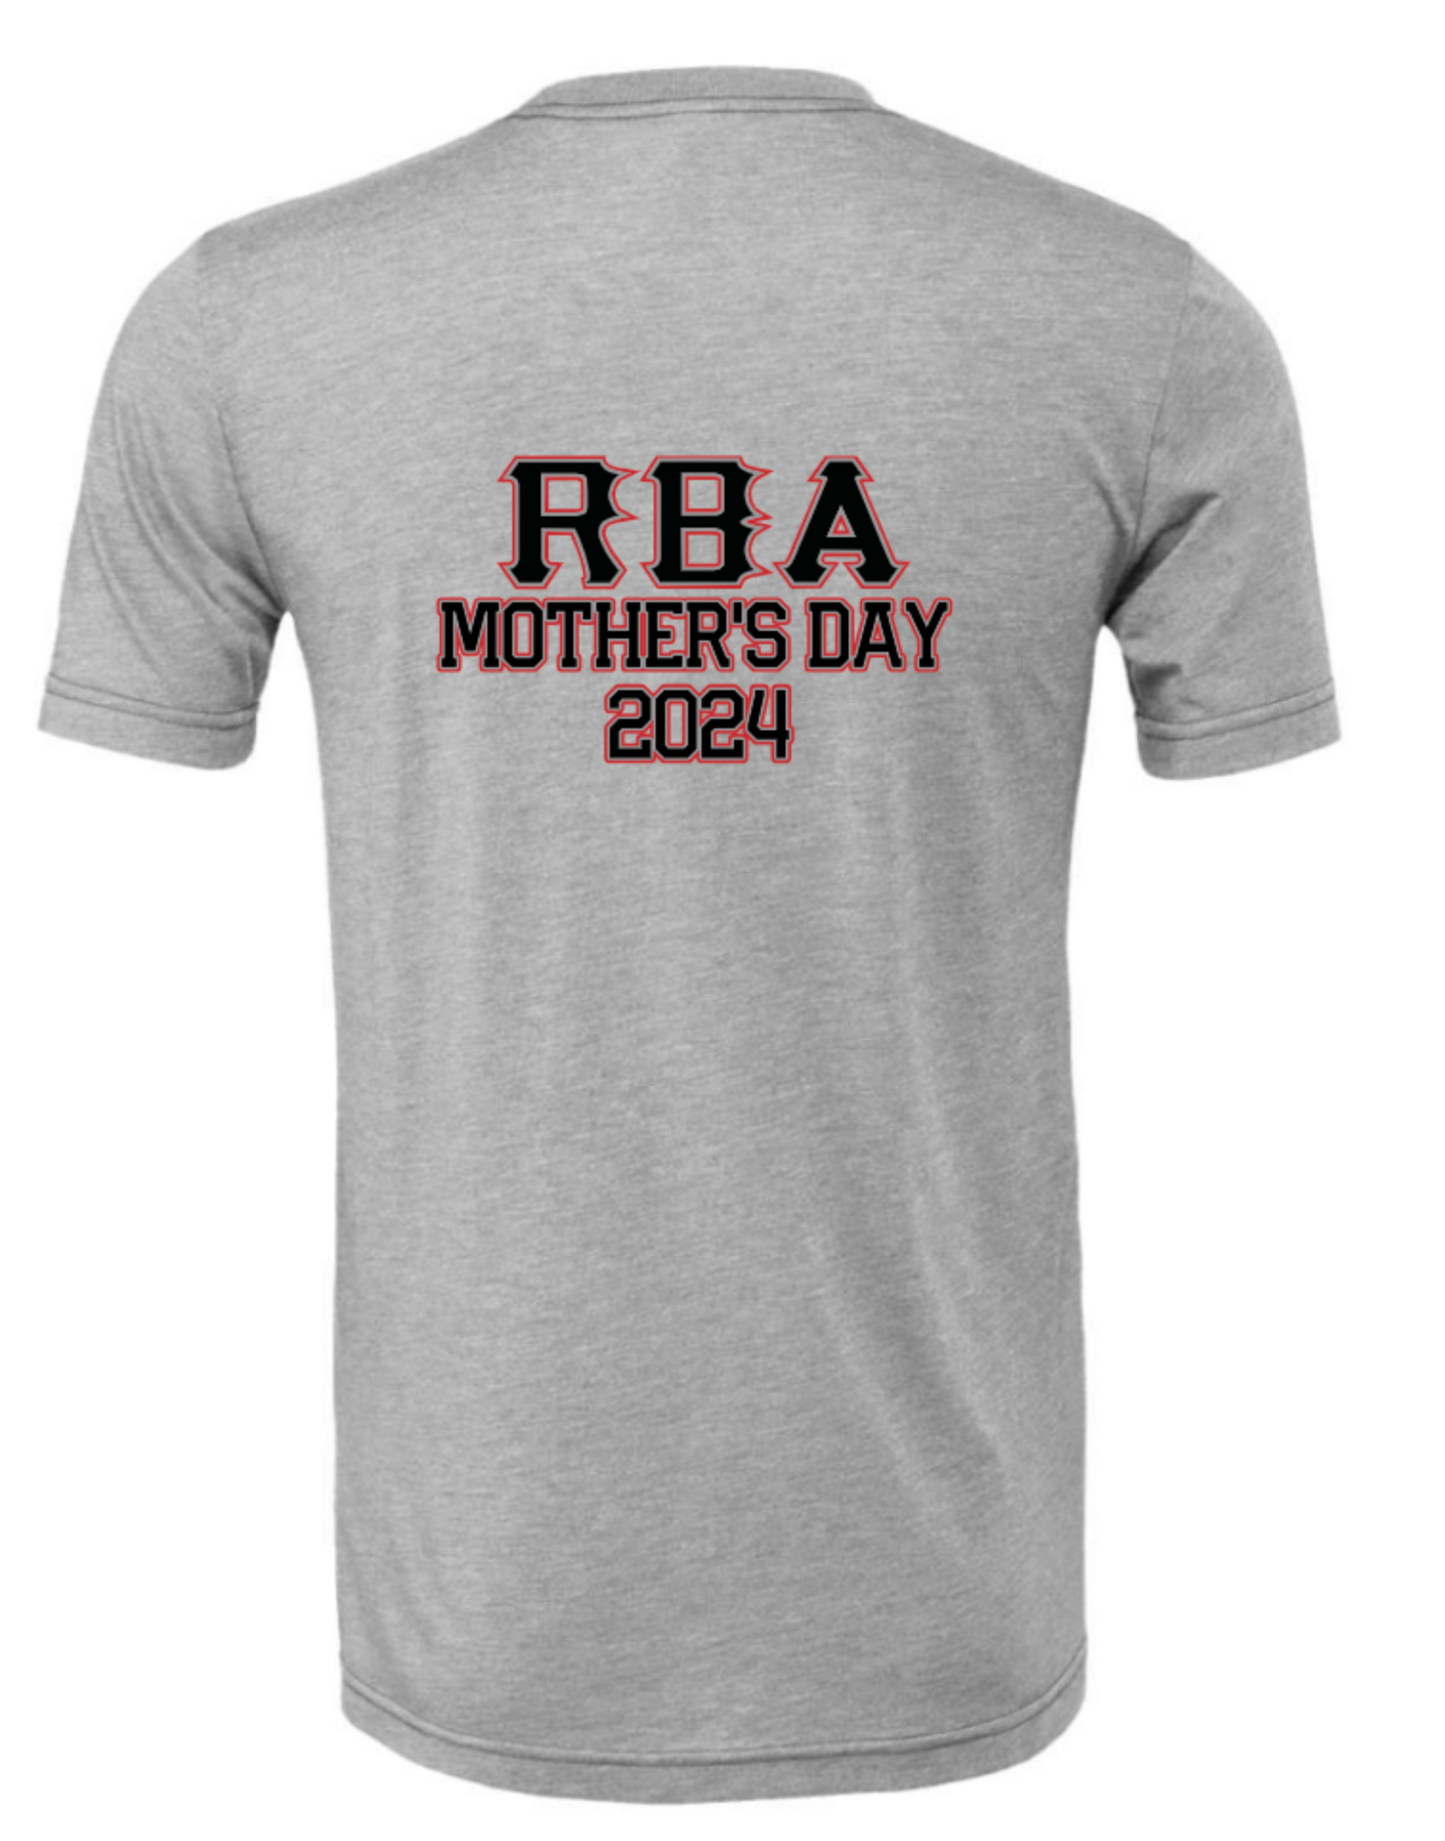 RBA MOTHERS DAY 2024 DESIGN